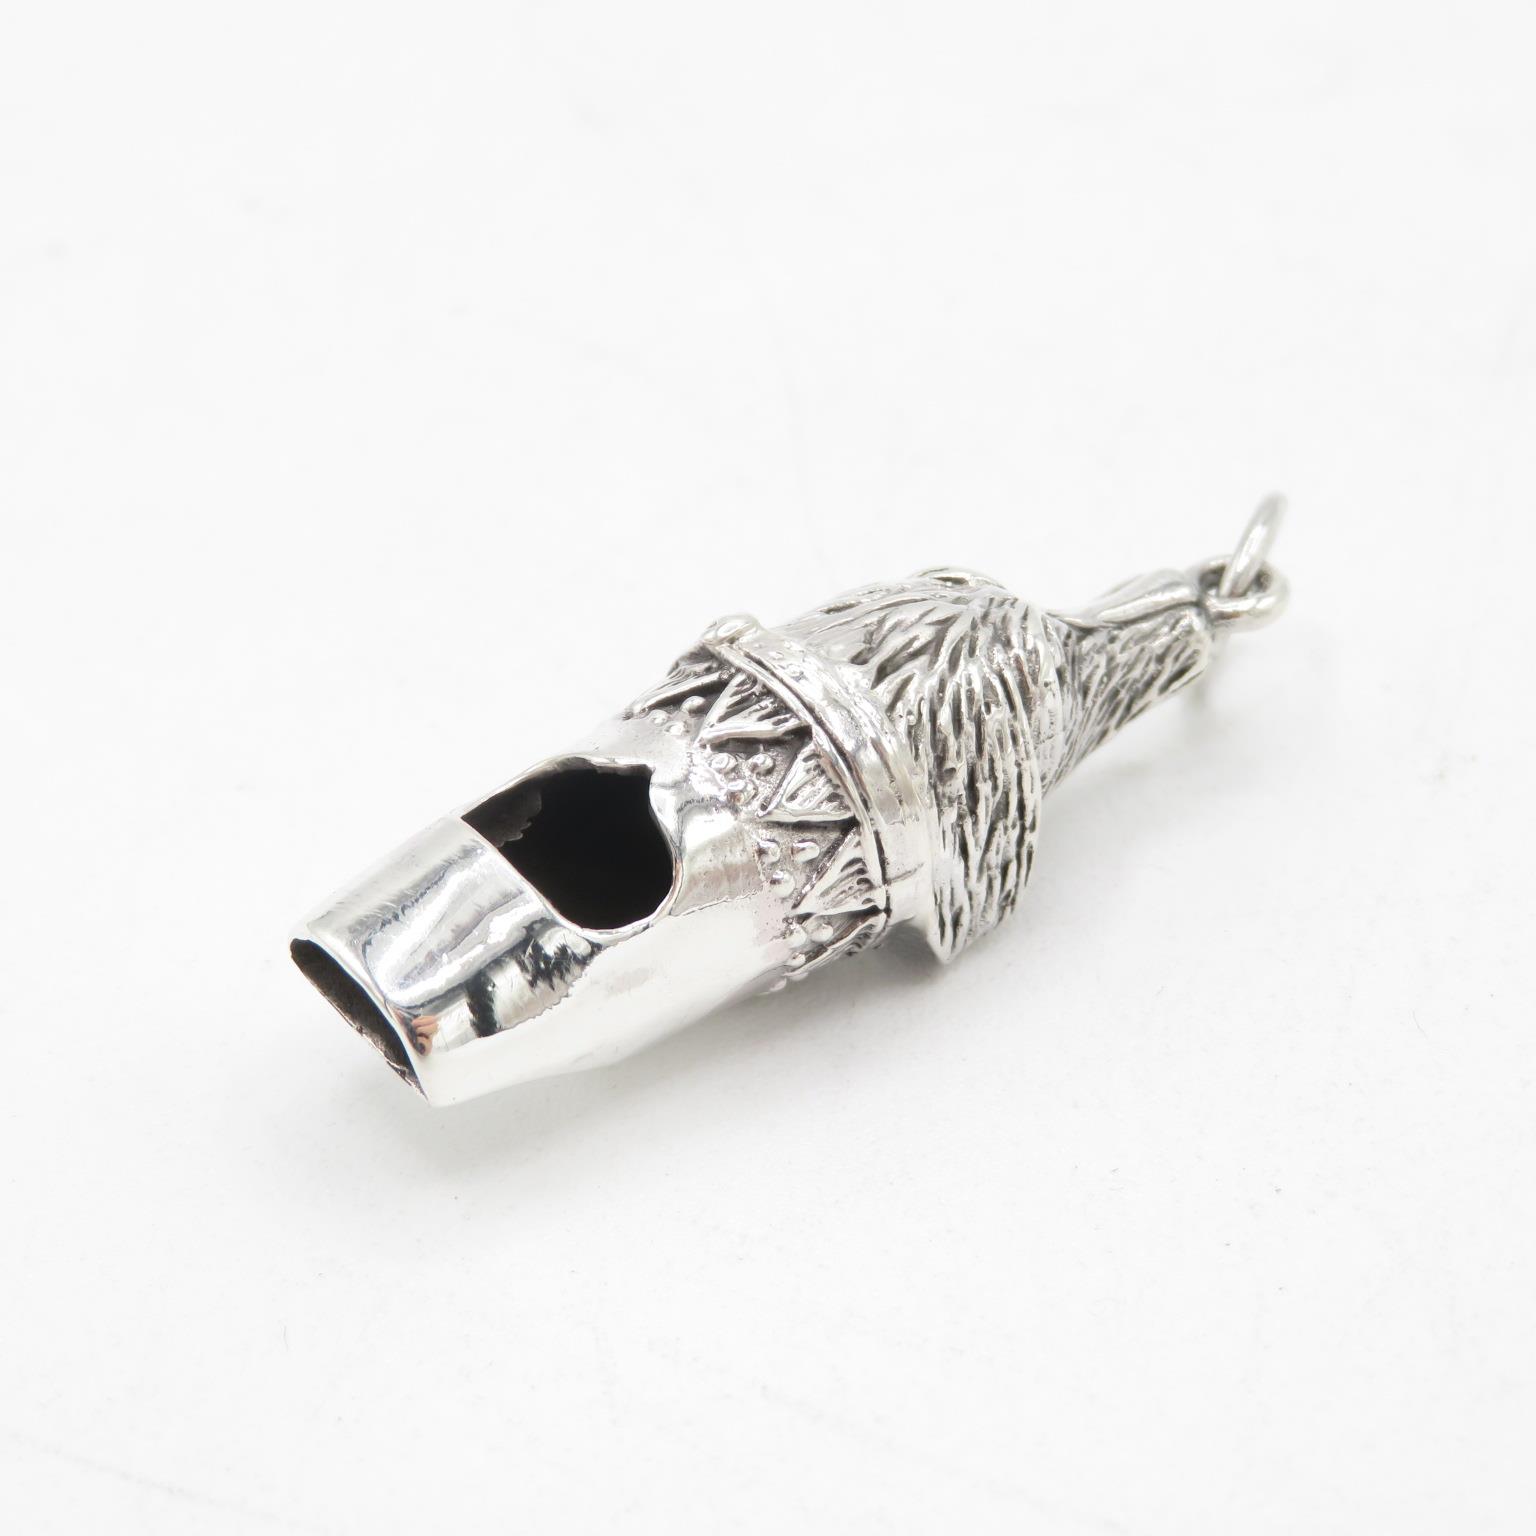 HM 925 Sterling Silver dog whistle with fob ring and detailed dog head design fully working (11. - Image 4 of 5